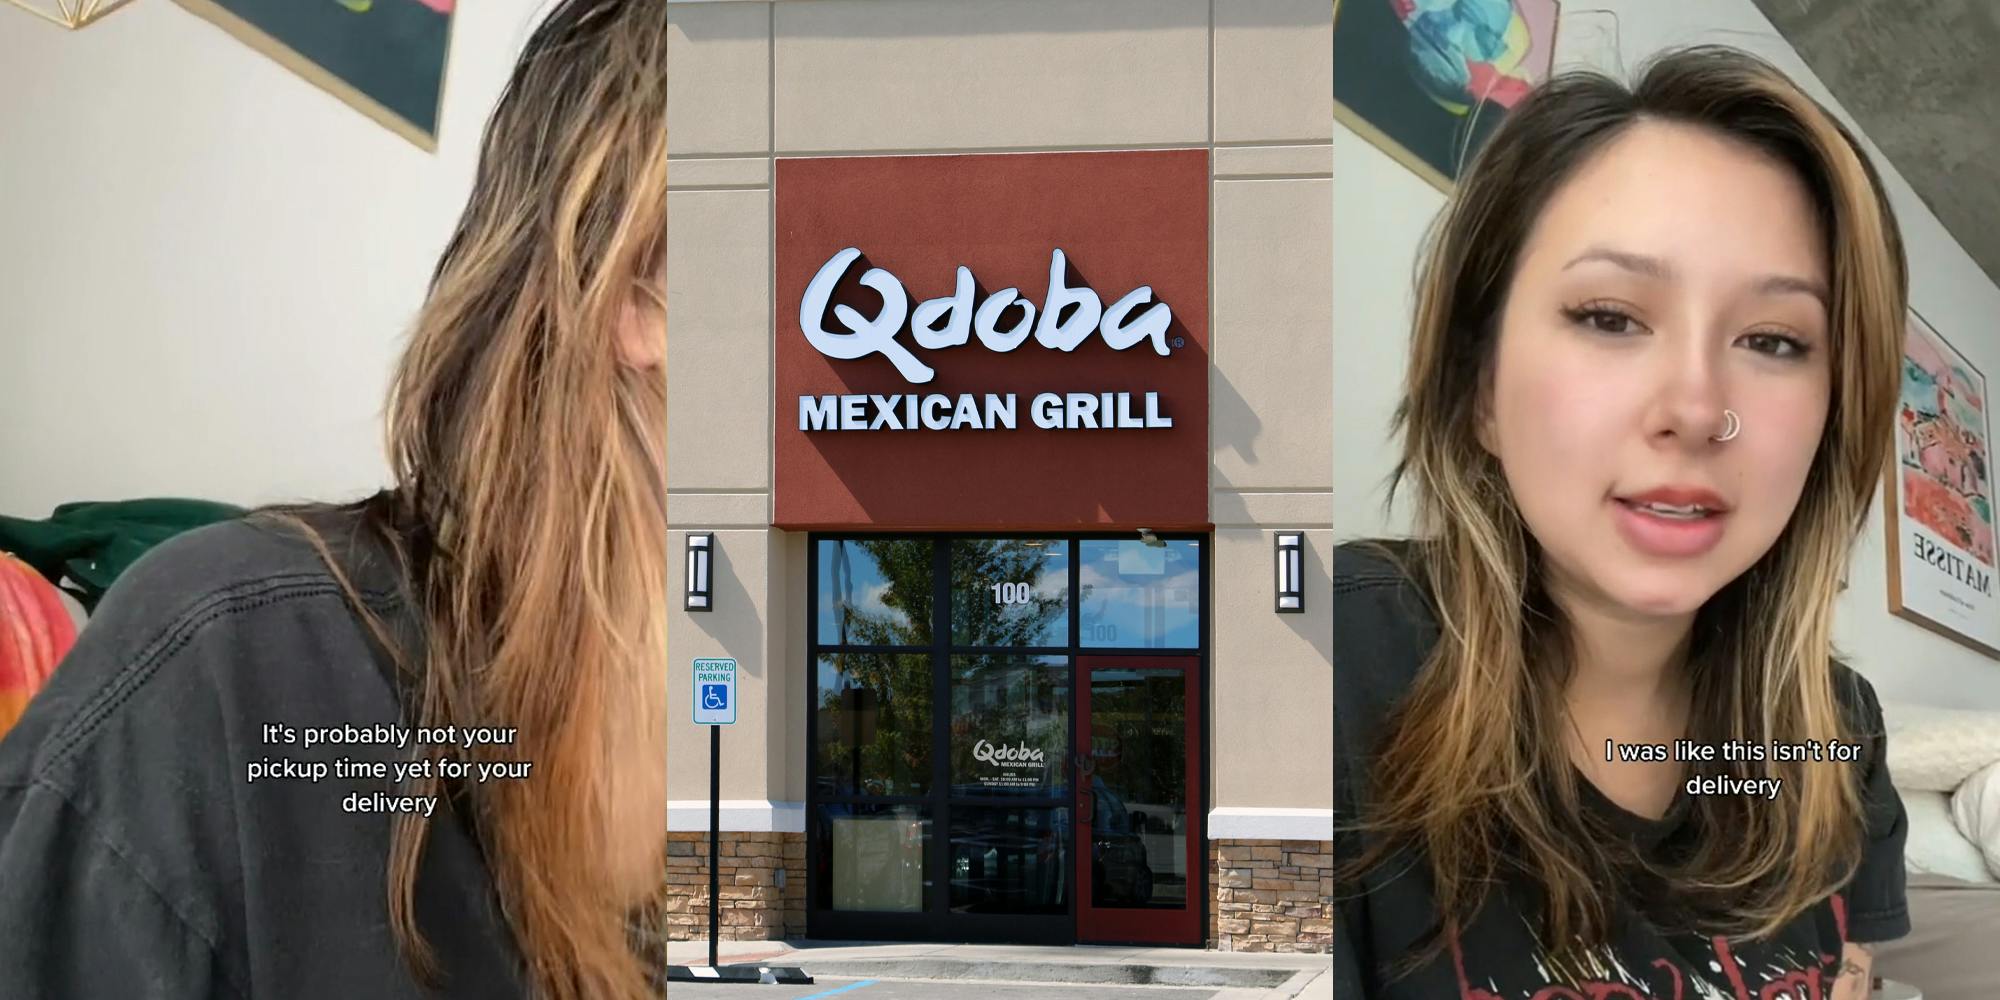 woman speaking caption "It's probably not your pickup time yet sorry for your delivery" (l) Qdoba sign on building above door (c) woman speaking caption "I was like this isn't for delivery" (r)